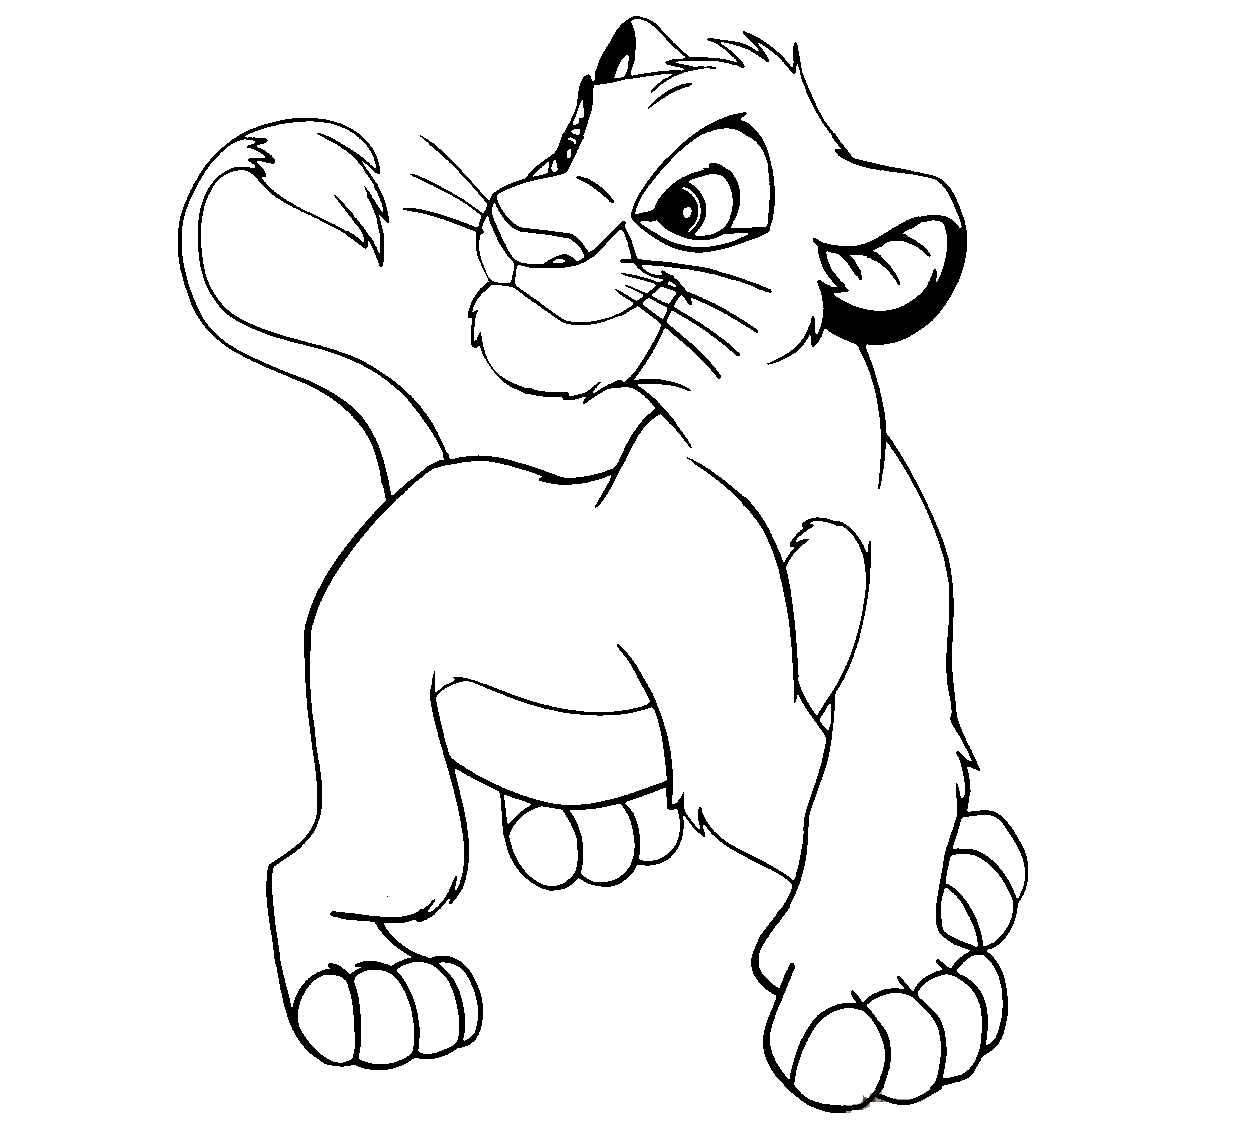 Download Disney Cartoon The Lion King For Kid Coloring Drawing Free wallpaper | Anggela Coloring Book For ...